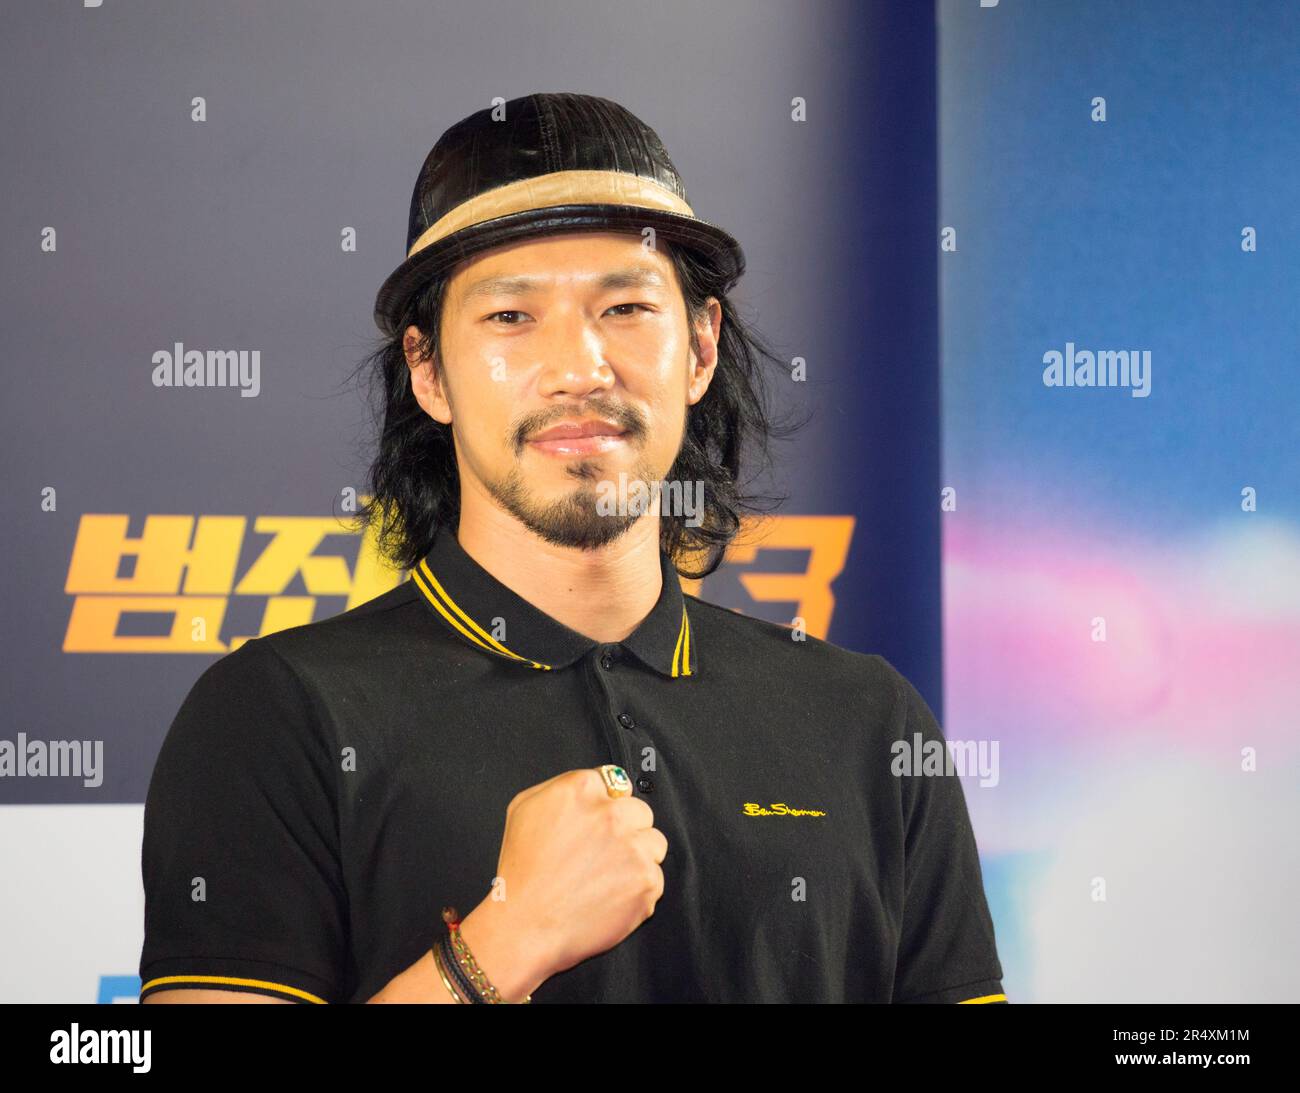 Kim Min, May 22, 2023 : South Korean actor Kim Min attends a photocall before a VIP preview of South Korean movie 'The Roundup: No Way Out' in Seoul, South Korea. 'The Roundup: No Way Out', the third installment of 'The Outlaws' series will hit local theaters on May 31. (Photo by Lee Jae-Won/AFLO) (SOUTH KOREA) Stock Photo